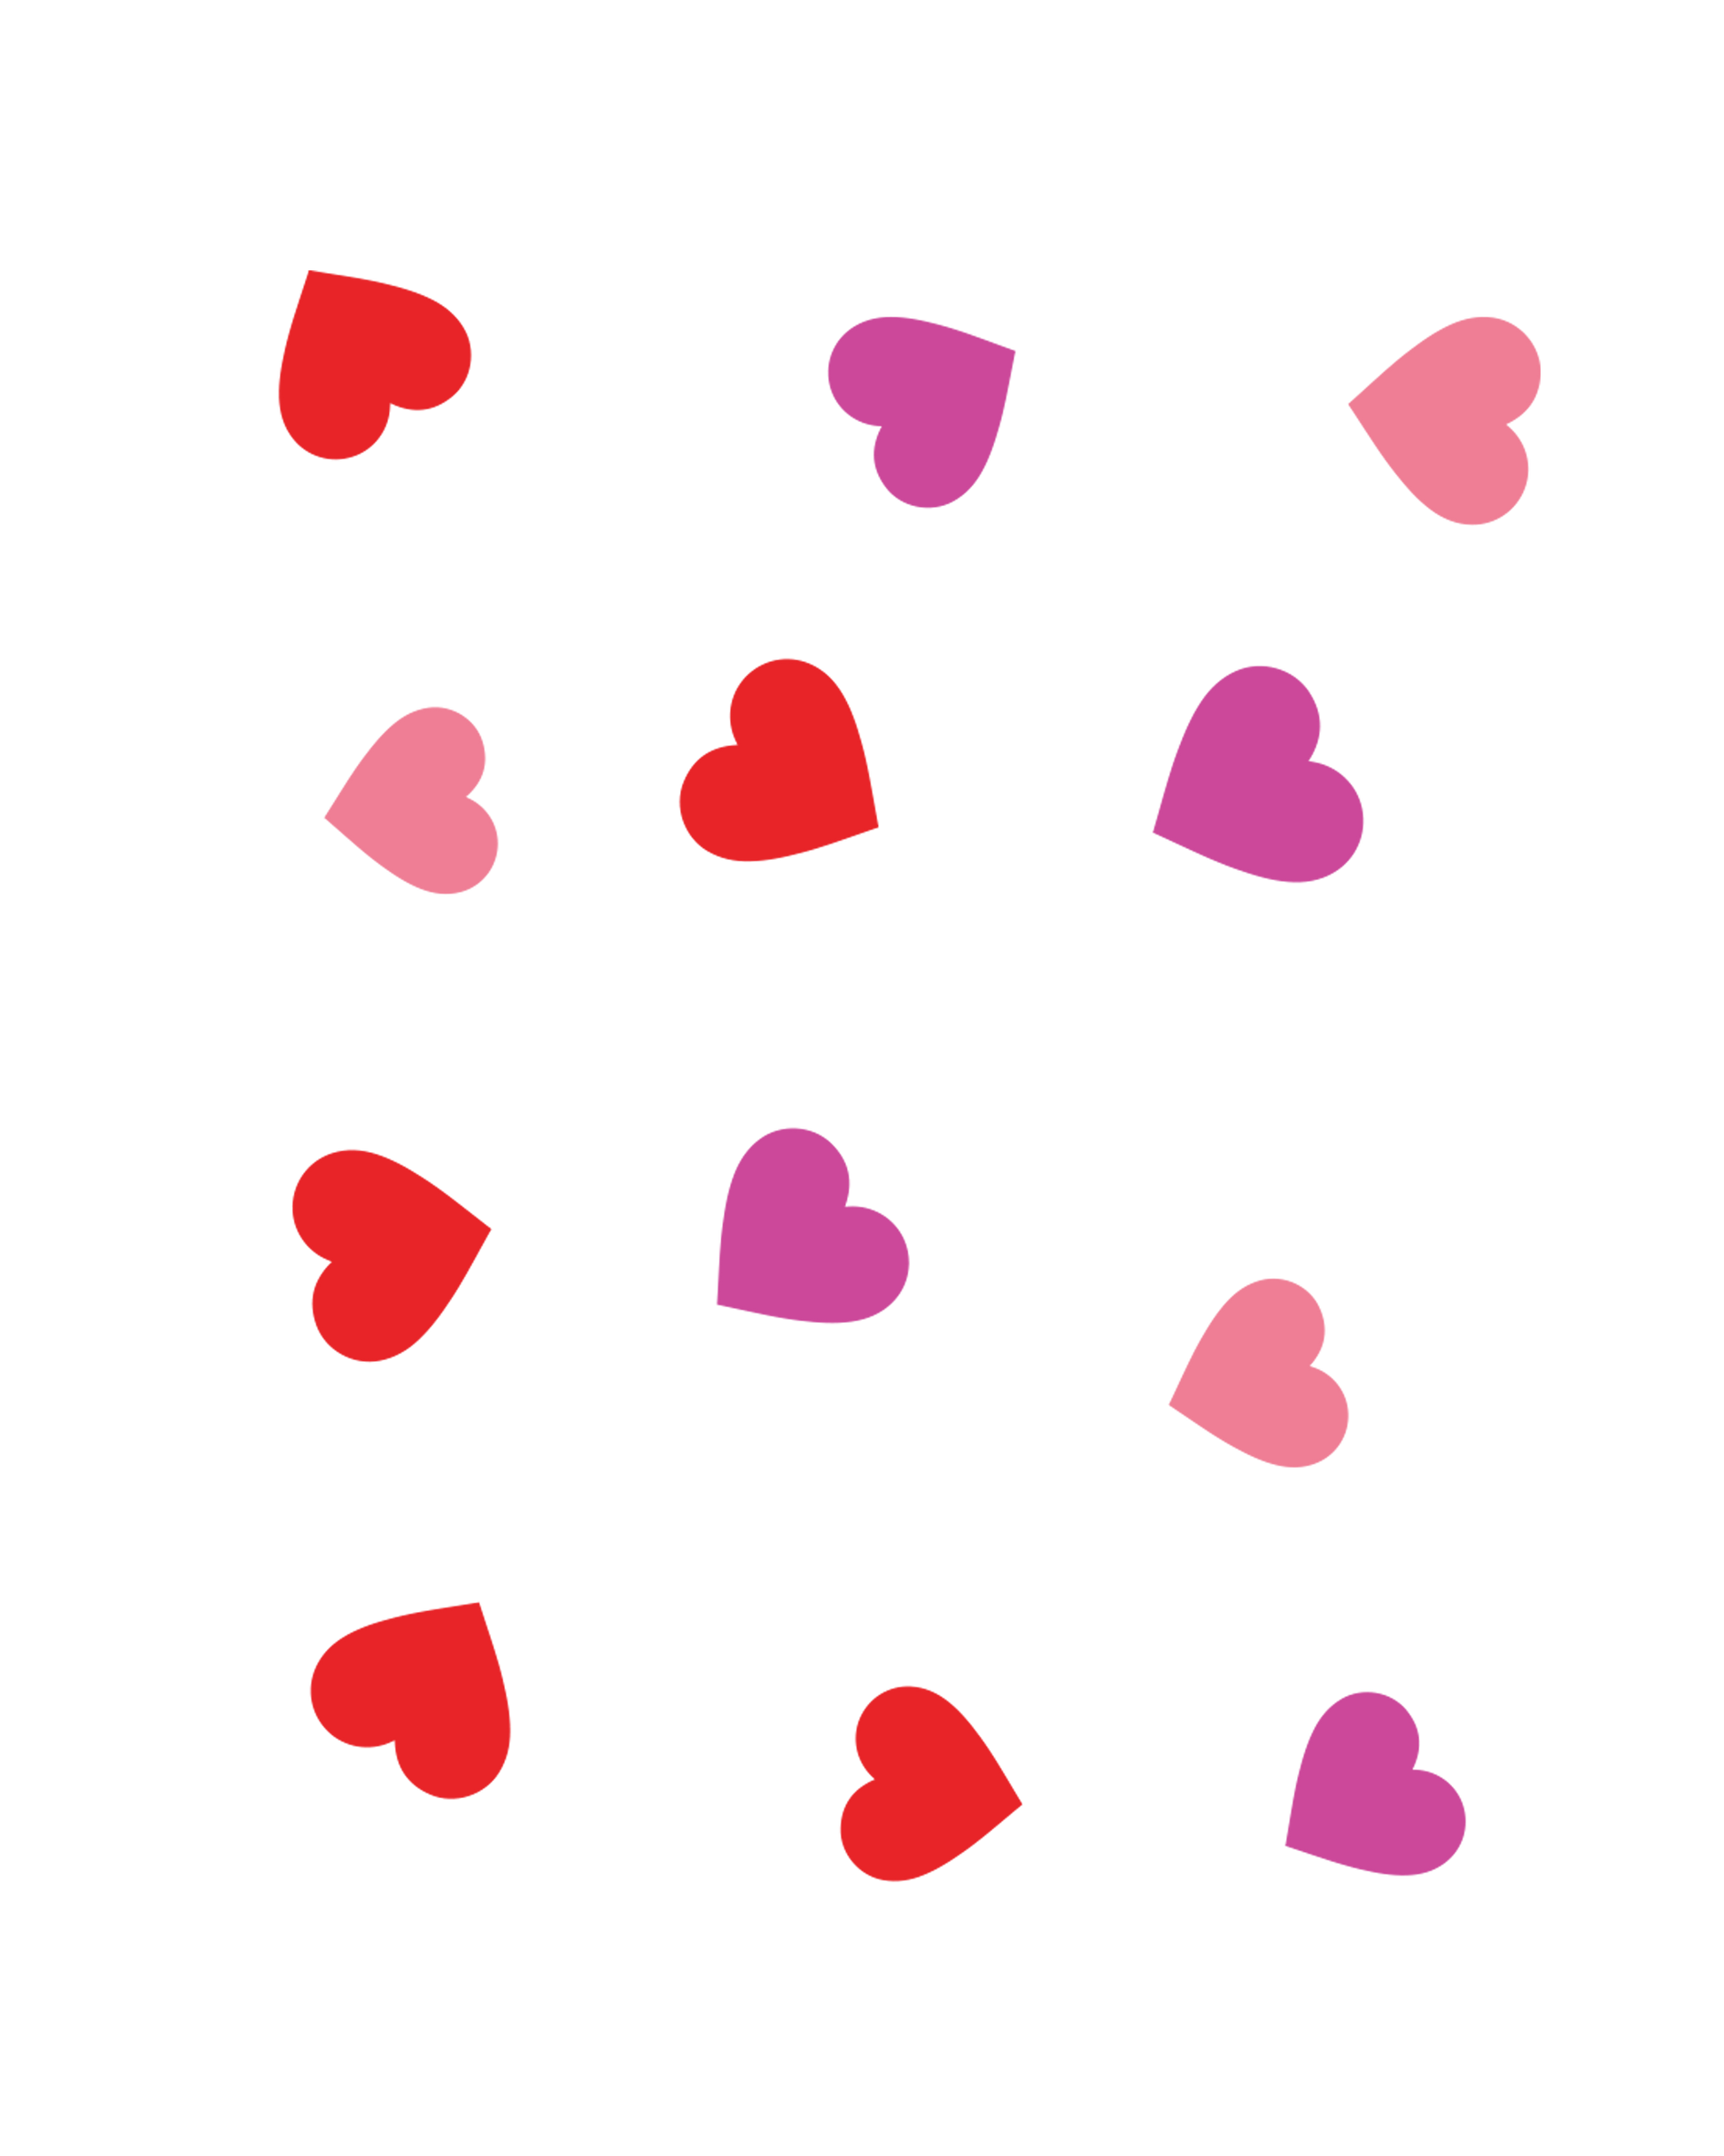 Colored hearts + text